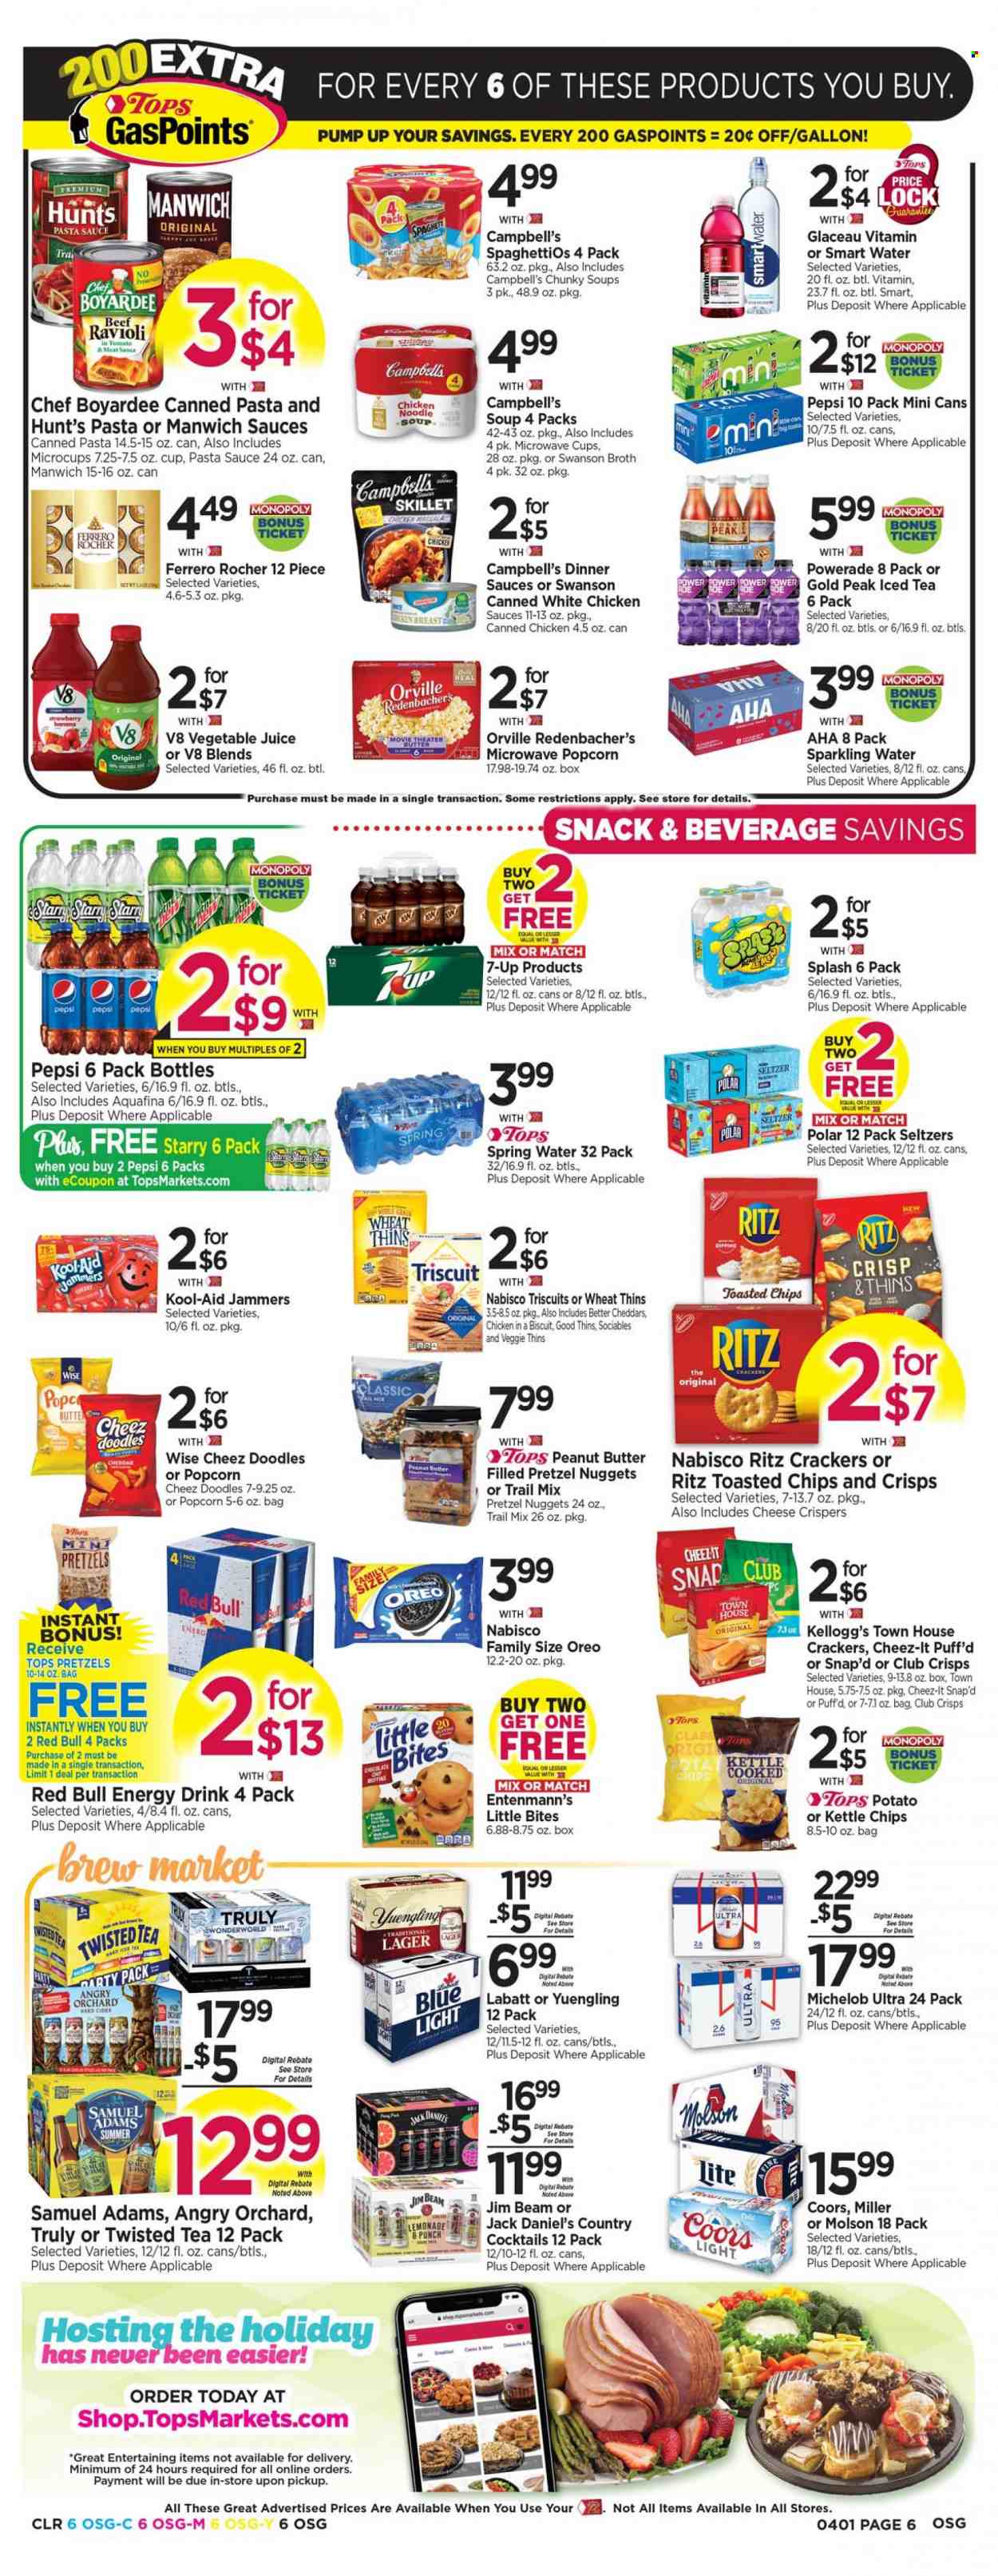 thumbnail - Tops Flyer - 03/26/2023 - 04/01/2023 - Sales products - pretzels, muffin, Entenmann's, cherries, Campbell's, ravioli, Jack Daniel's, pasta sauce, soup, nuggets, noodles cup, noodles, Oreo, chocolate, snack, Ferrero Rocher, crackers, Kellogg's, biscuit, Little Bites, RITZ, chips, Thins, popcorn, Cheez-It, Kettle chips, broth, Manwich, Chef Boyardee, peanut butter, trail mix, lemonade, Powerade, Pepsi, juice, energy drink, ice tea, 7UP, Red Bull, vegetable juice, Aquafina, seltzer water, spring water, sparkling water, Smartwater, water, Jim Beam, TRULY, cider, beer, Miller, Lager, Coors, Twisted Tea, Yuengling, Michelob. Page 6.